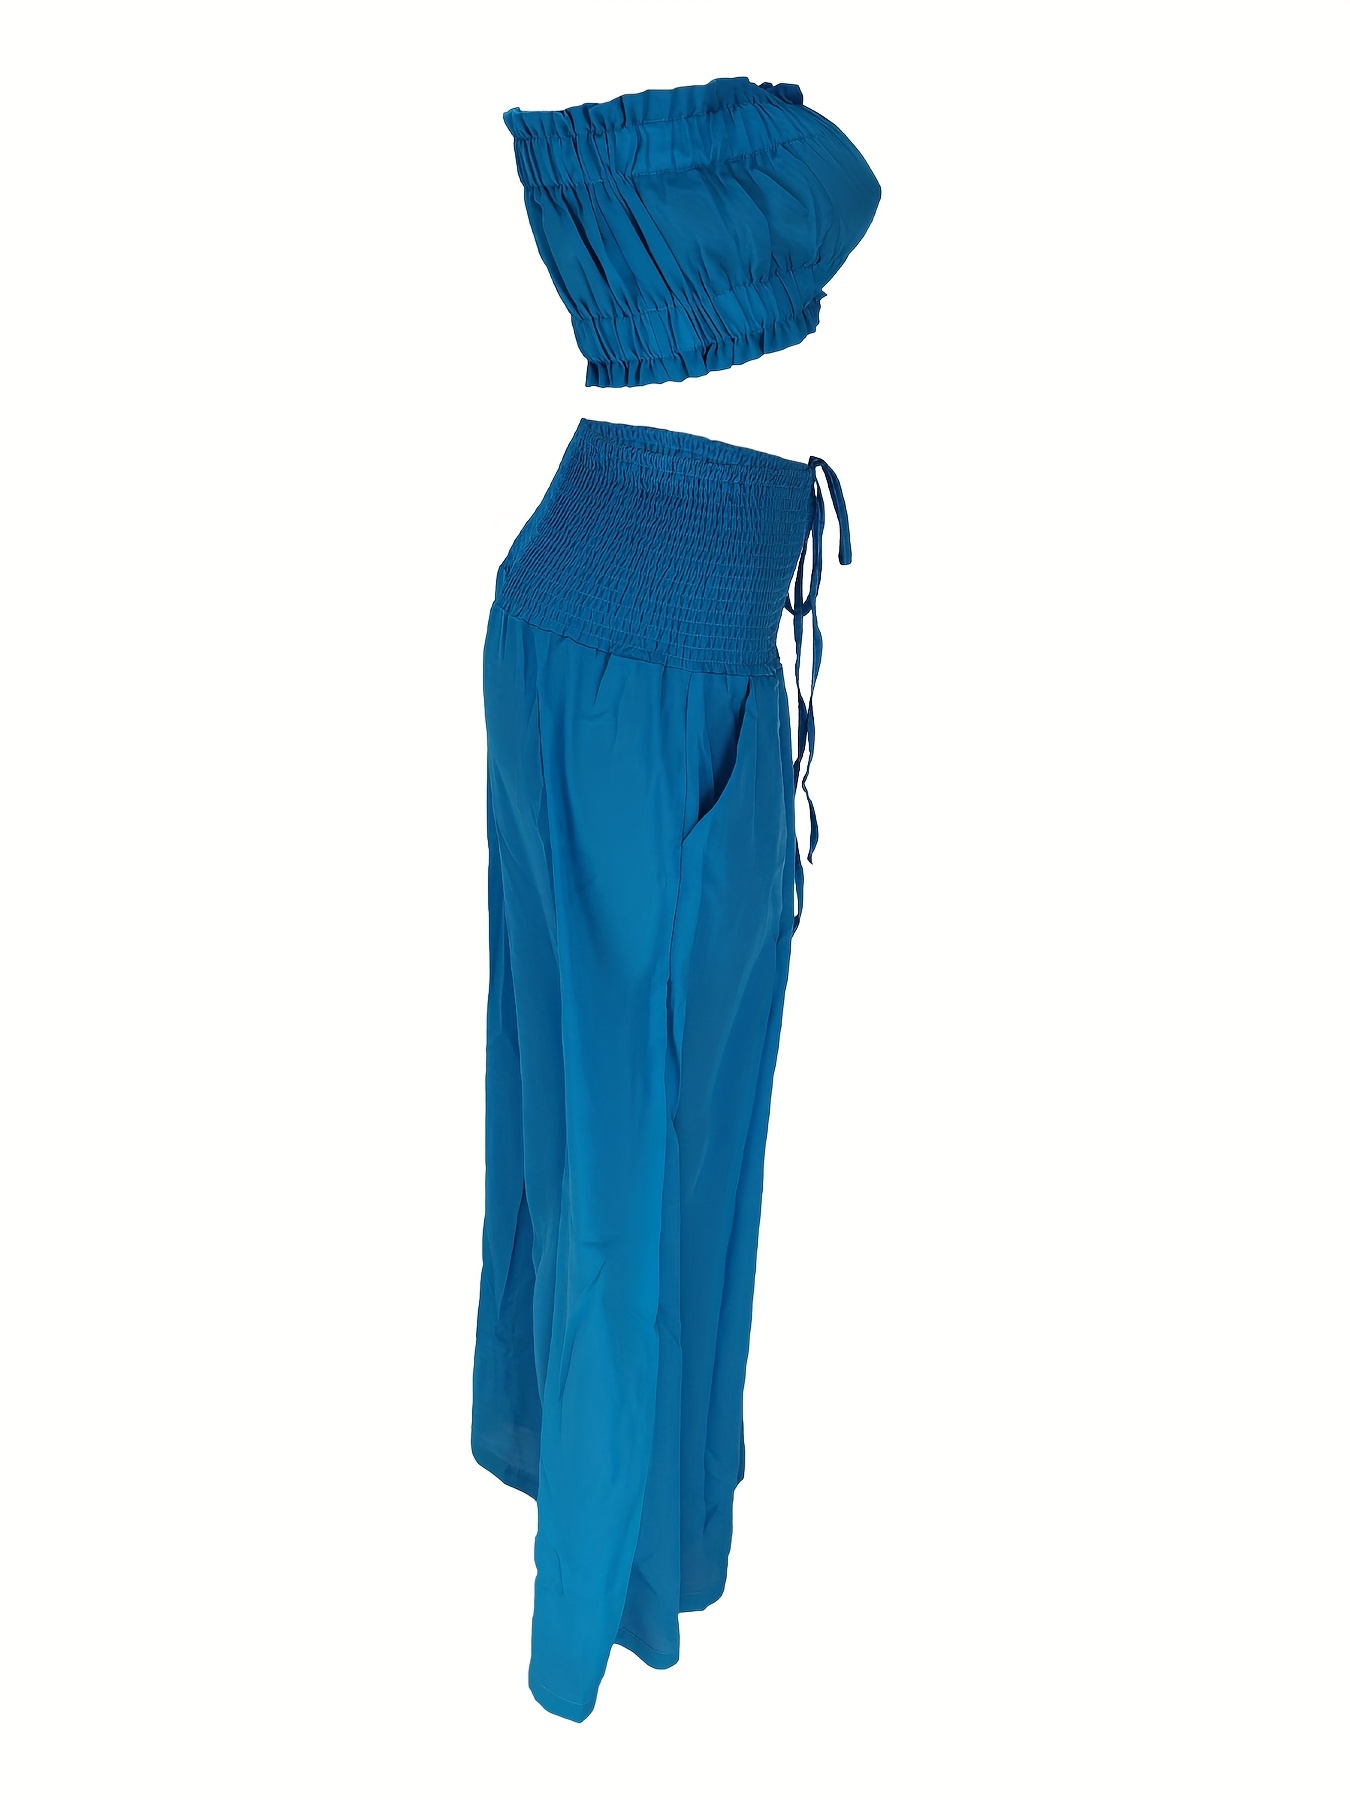 Solid Matching Two-piece Set, Casual Eyelet Tank Top & Wide Leg Pants  Outfits, Women's Clothing